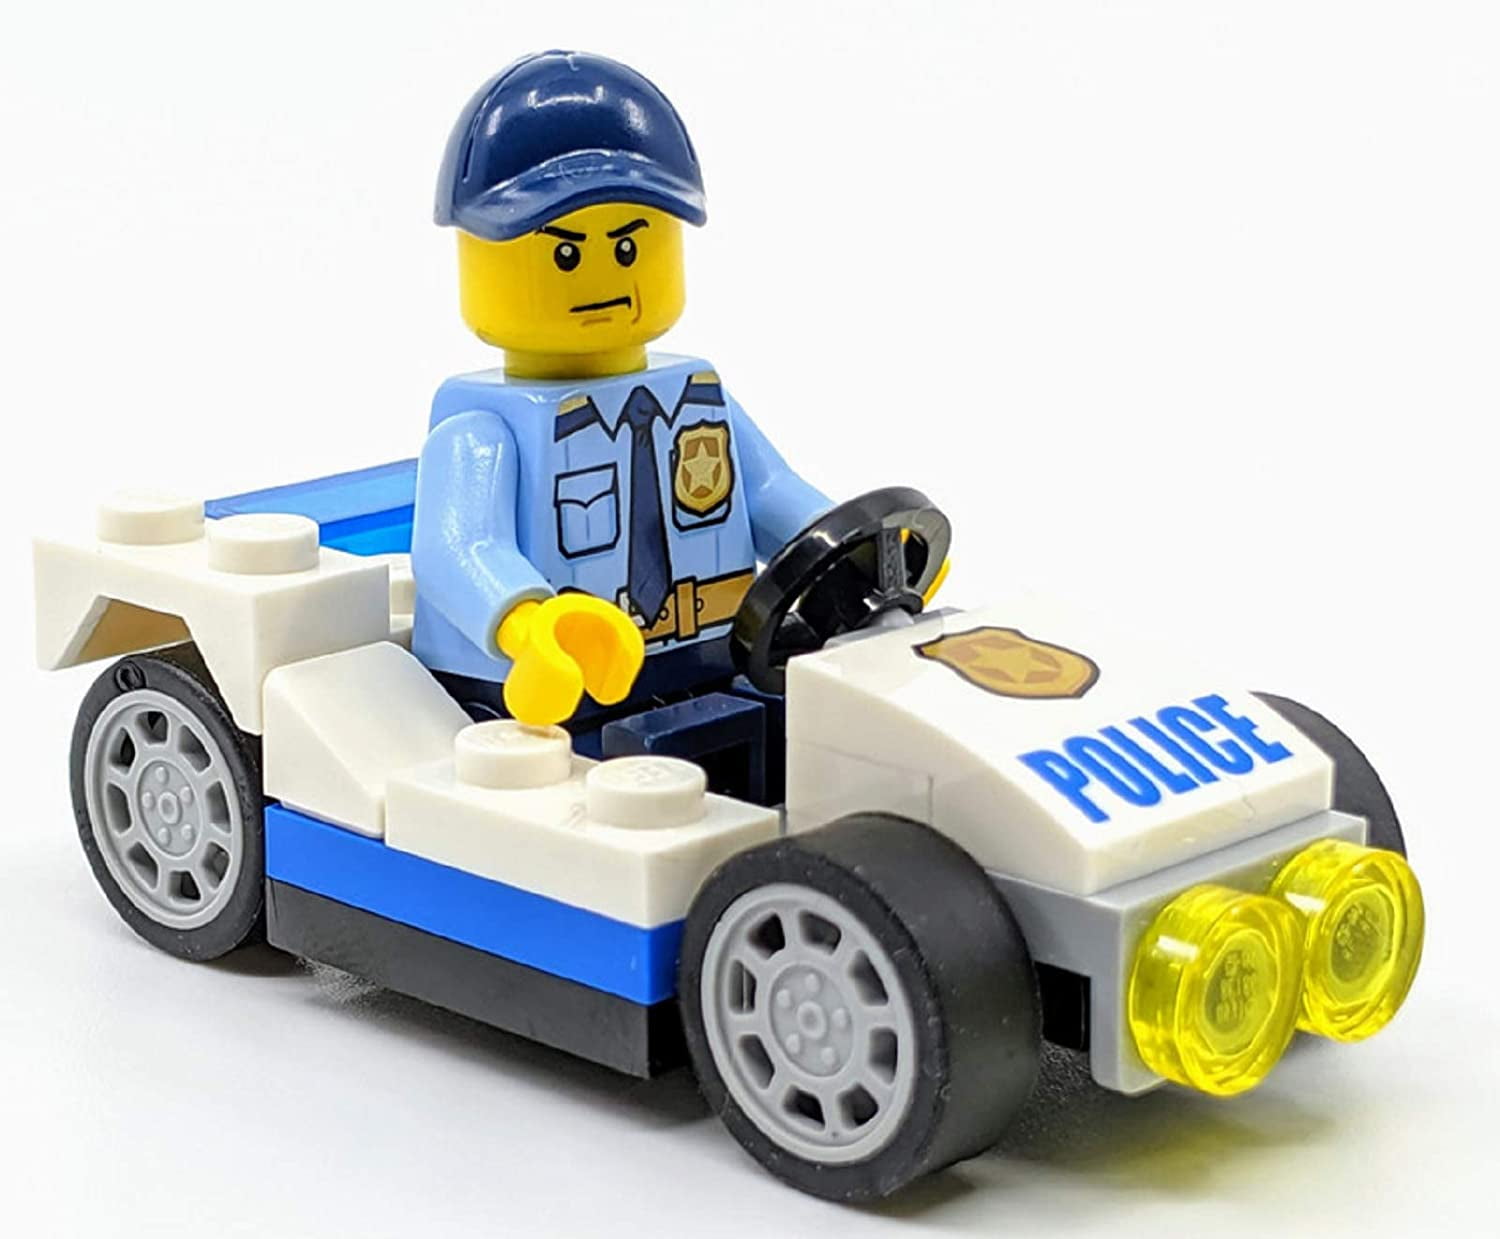 LEGO City Minifigure - Policeman / Police officer with handcuffs - Extra  Extra Bricks